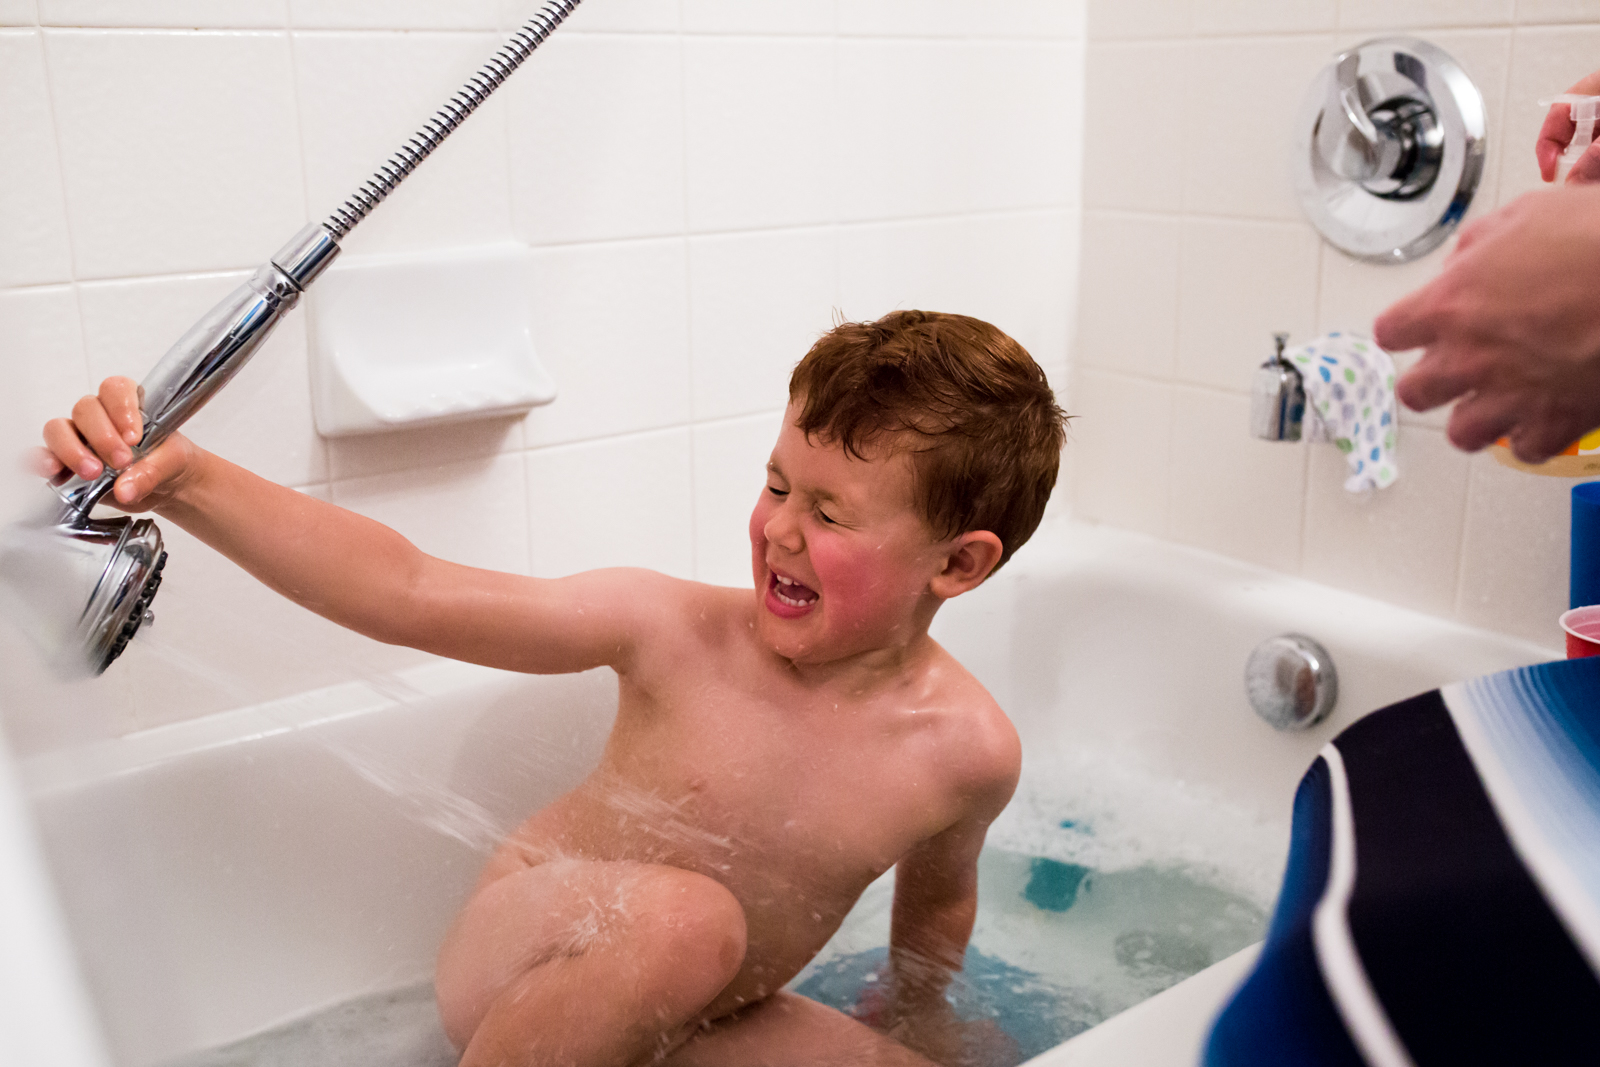 Maternity Photographer Captures a funny moment of a 4 year old boy accidently spraying himself with water in the bath tub in McKinney Texas, Lawren Rose Photography